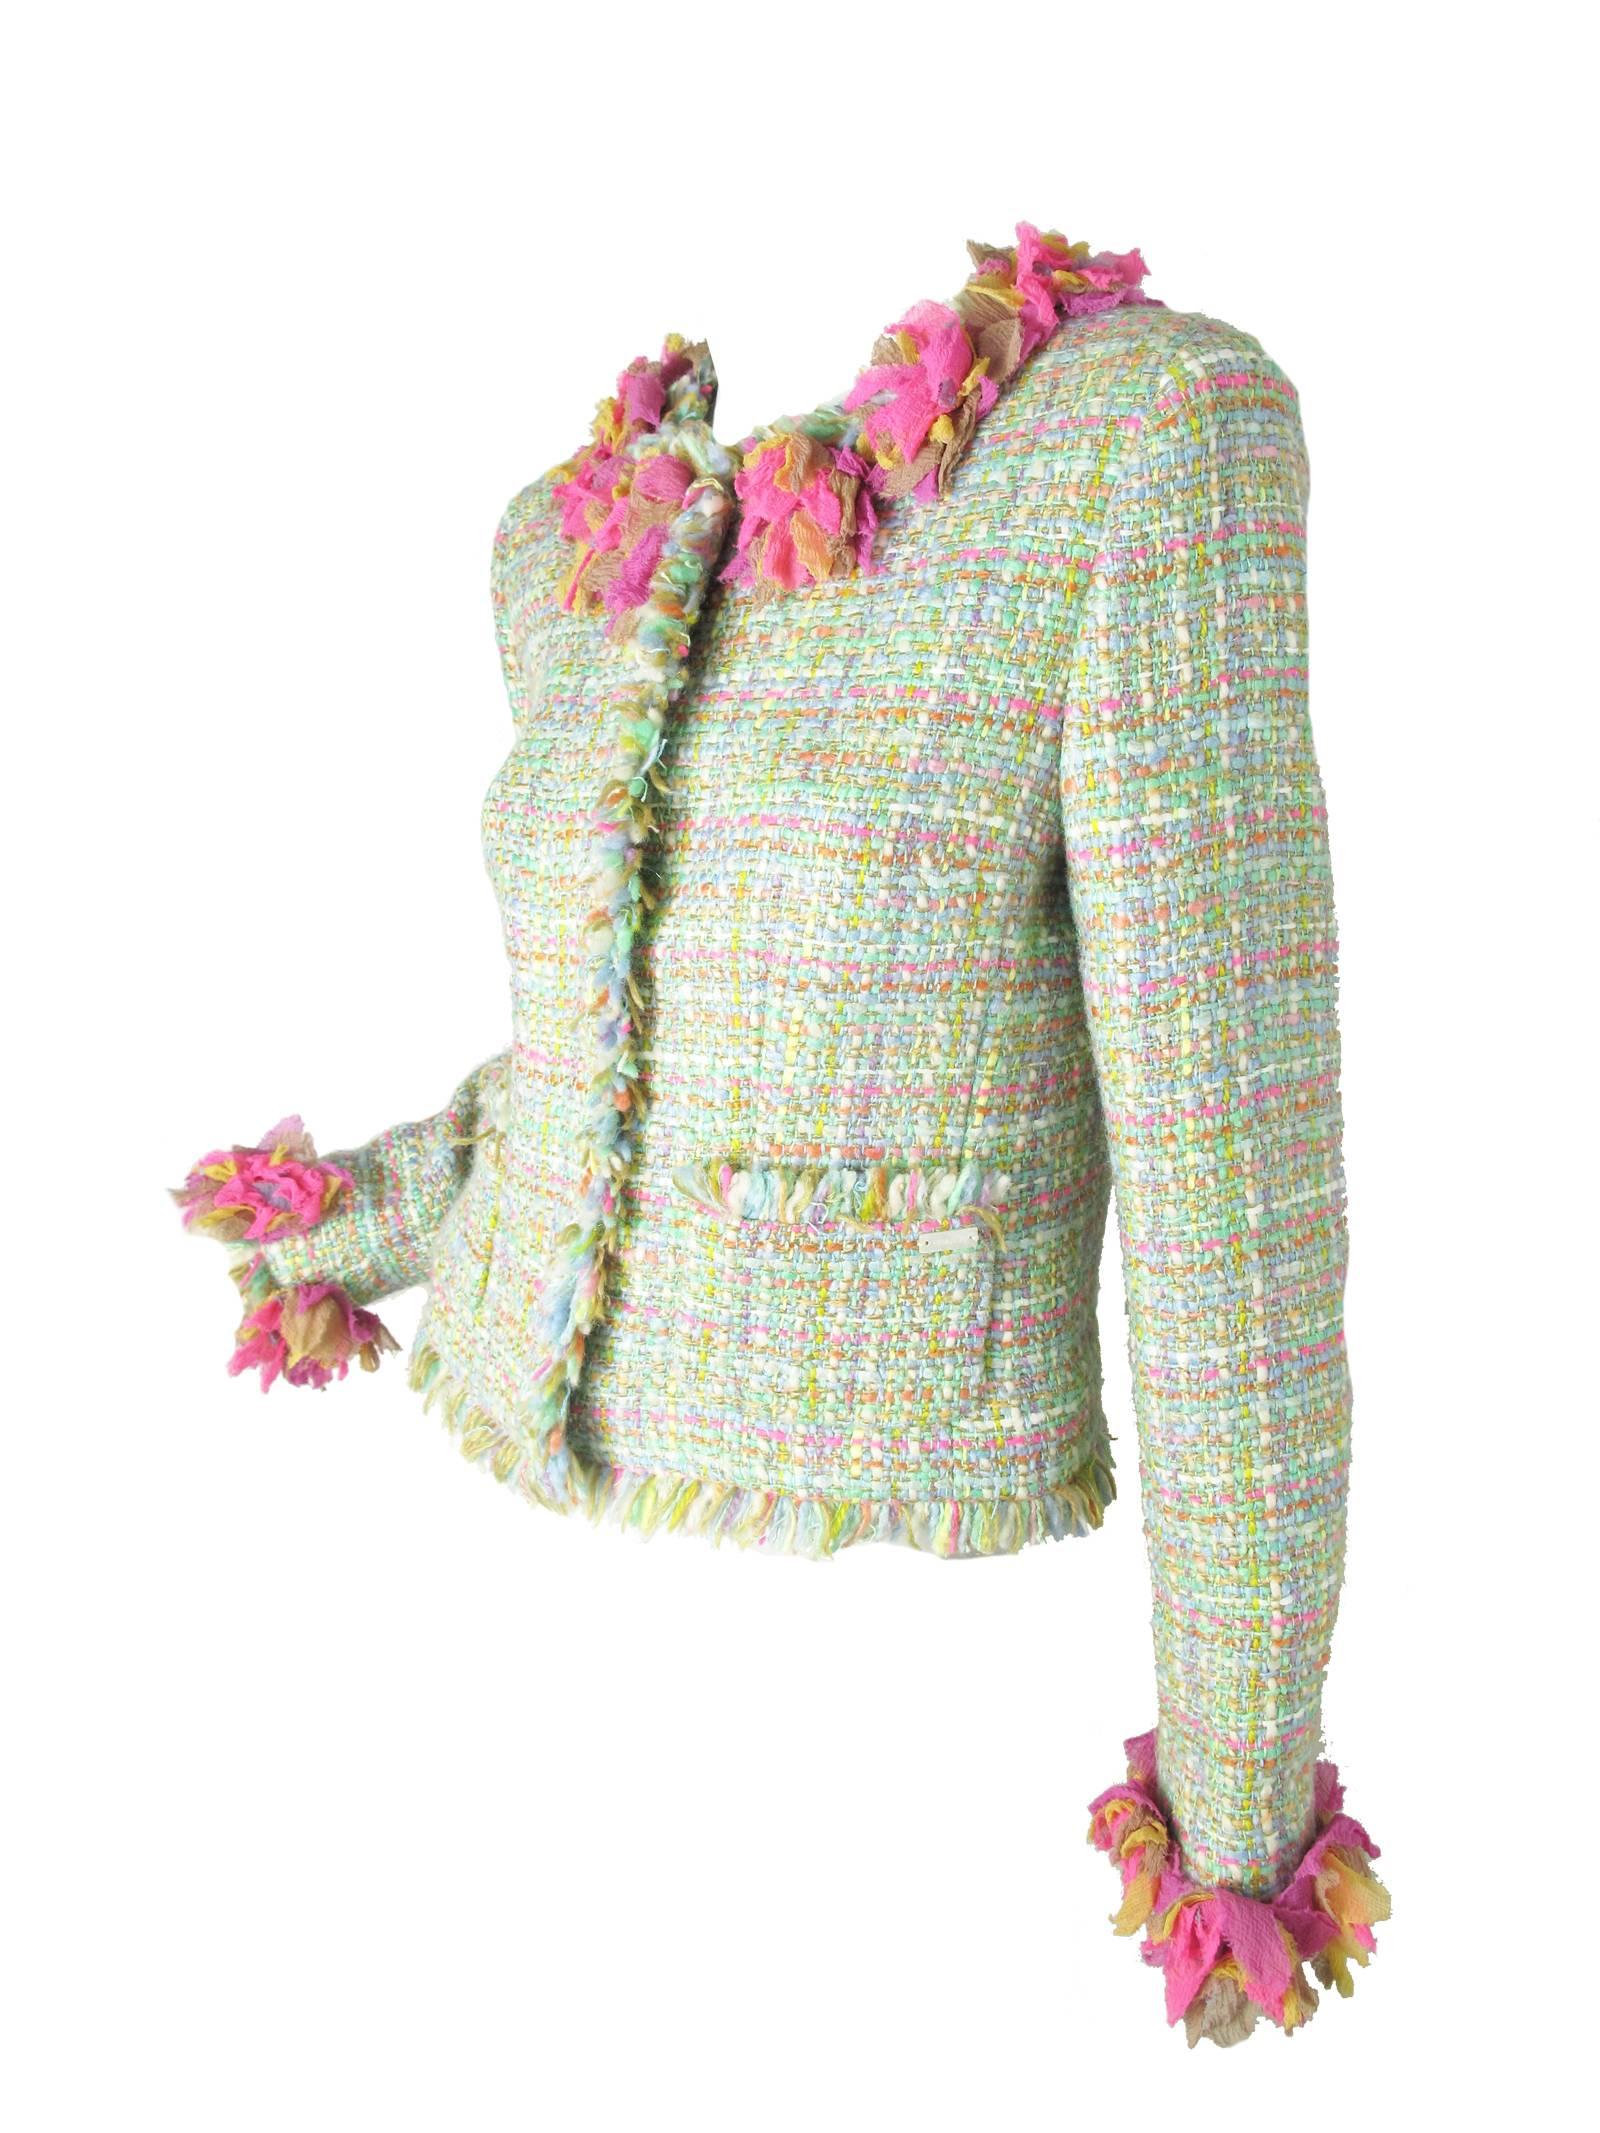 2001 Chanel pastel tweed jacket, ripped flower trim, hot pink, gold, cream, mint green. Two front pockets. Extra fabric swatches. clear snaps to close. silk lined. Made in France. Condition: Excellent. Size 40 / US 6 - 8 

Approximate